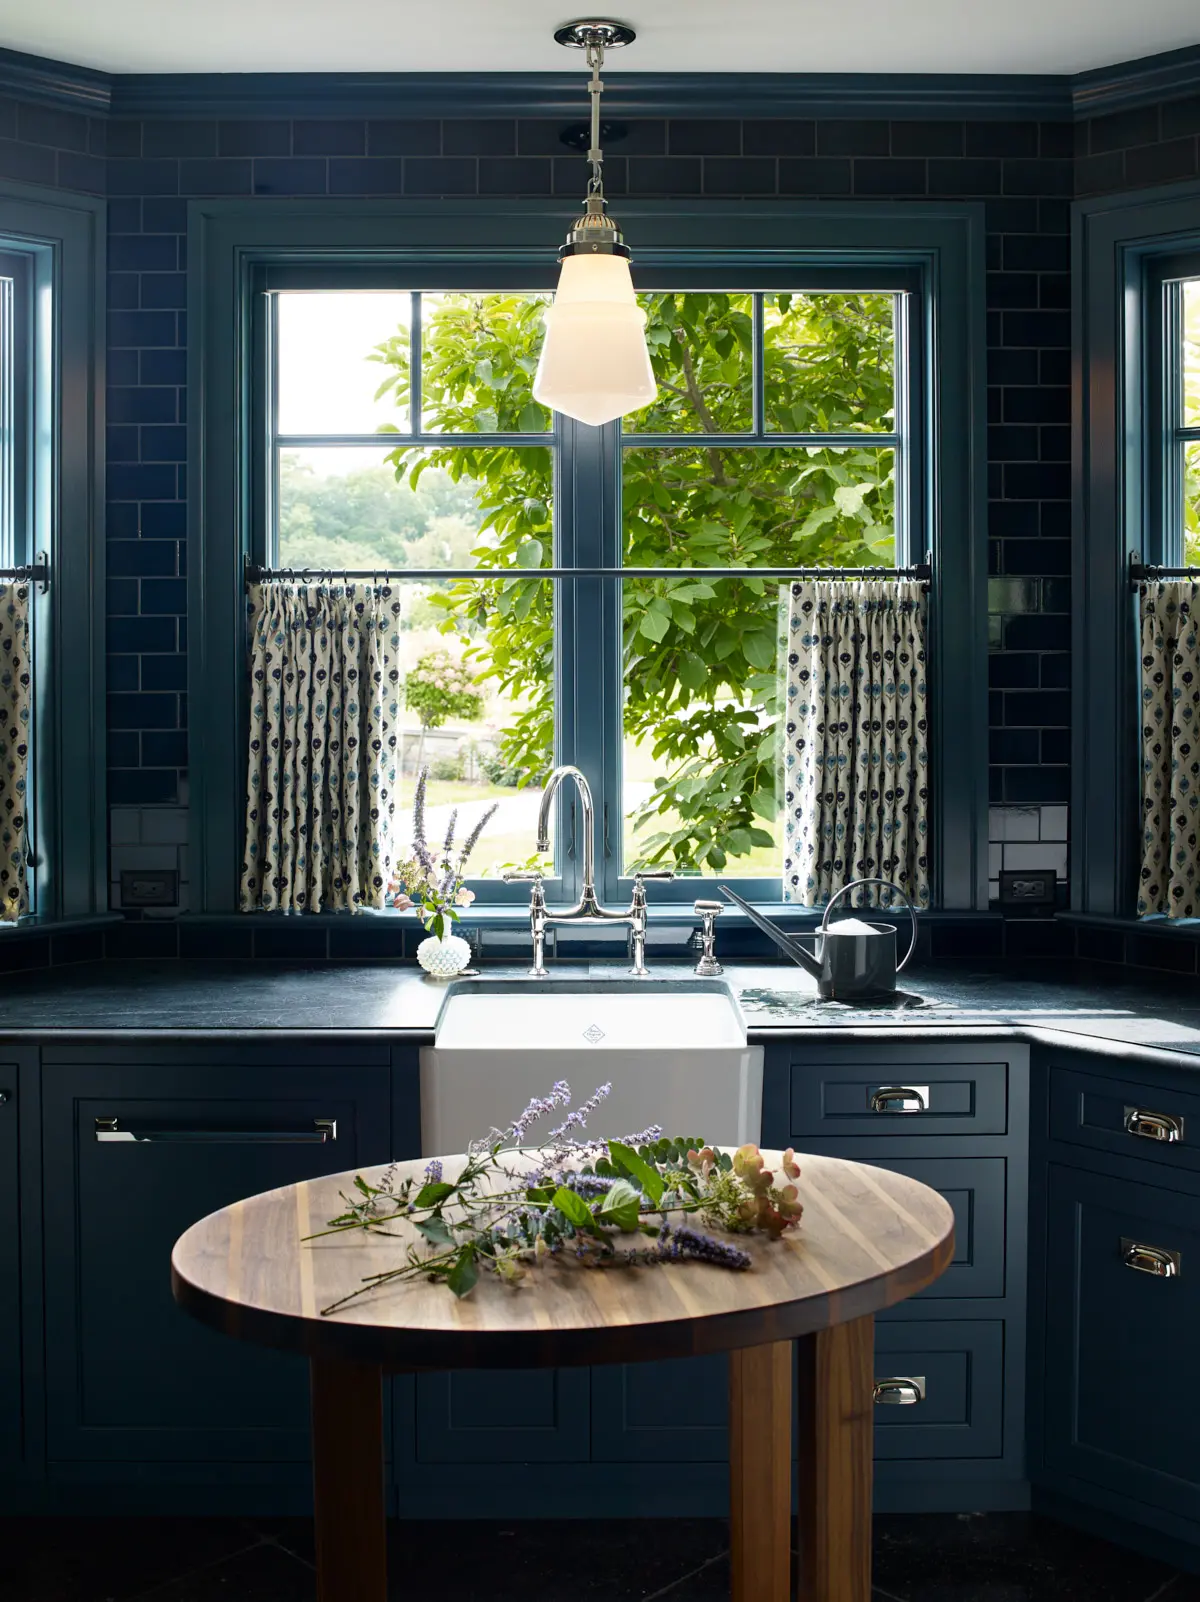 A view of the kitchen area that highlights the unique light fixture and deep blue theme.